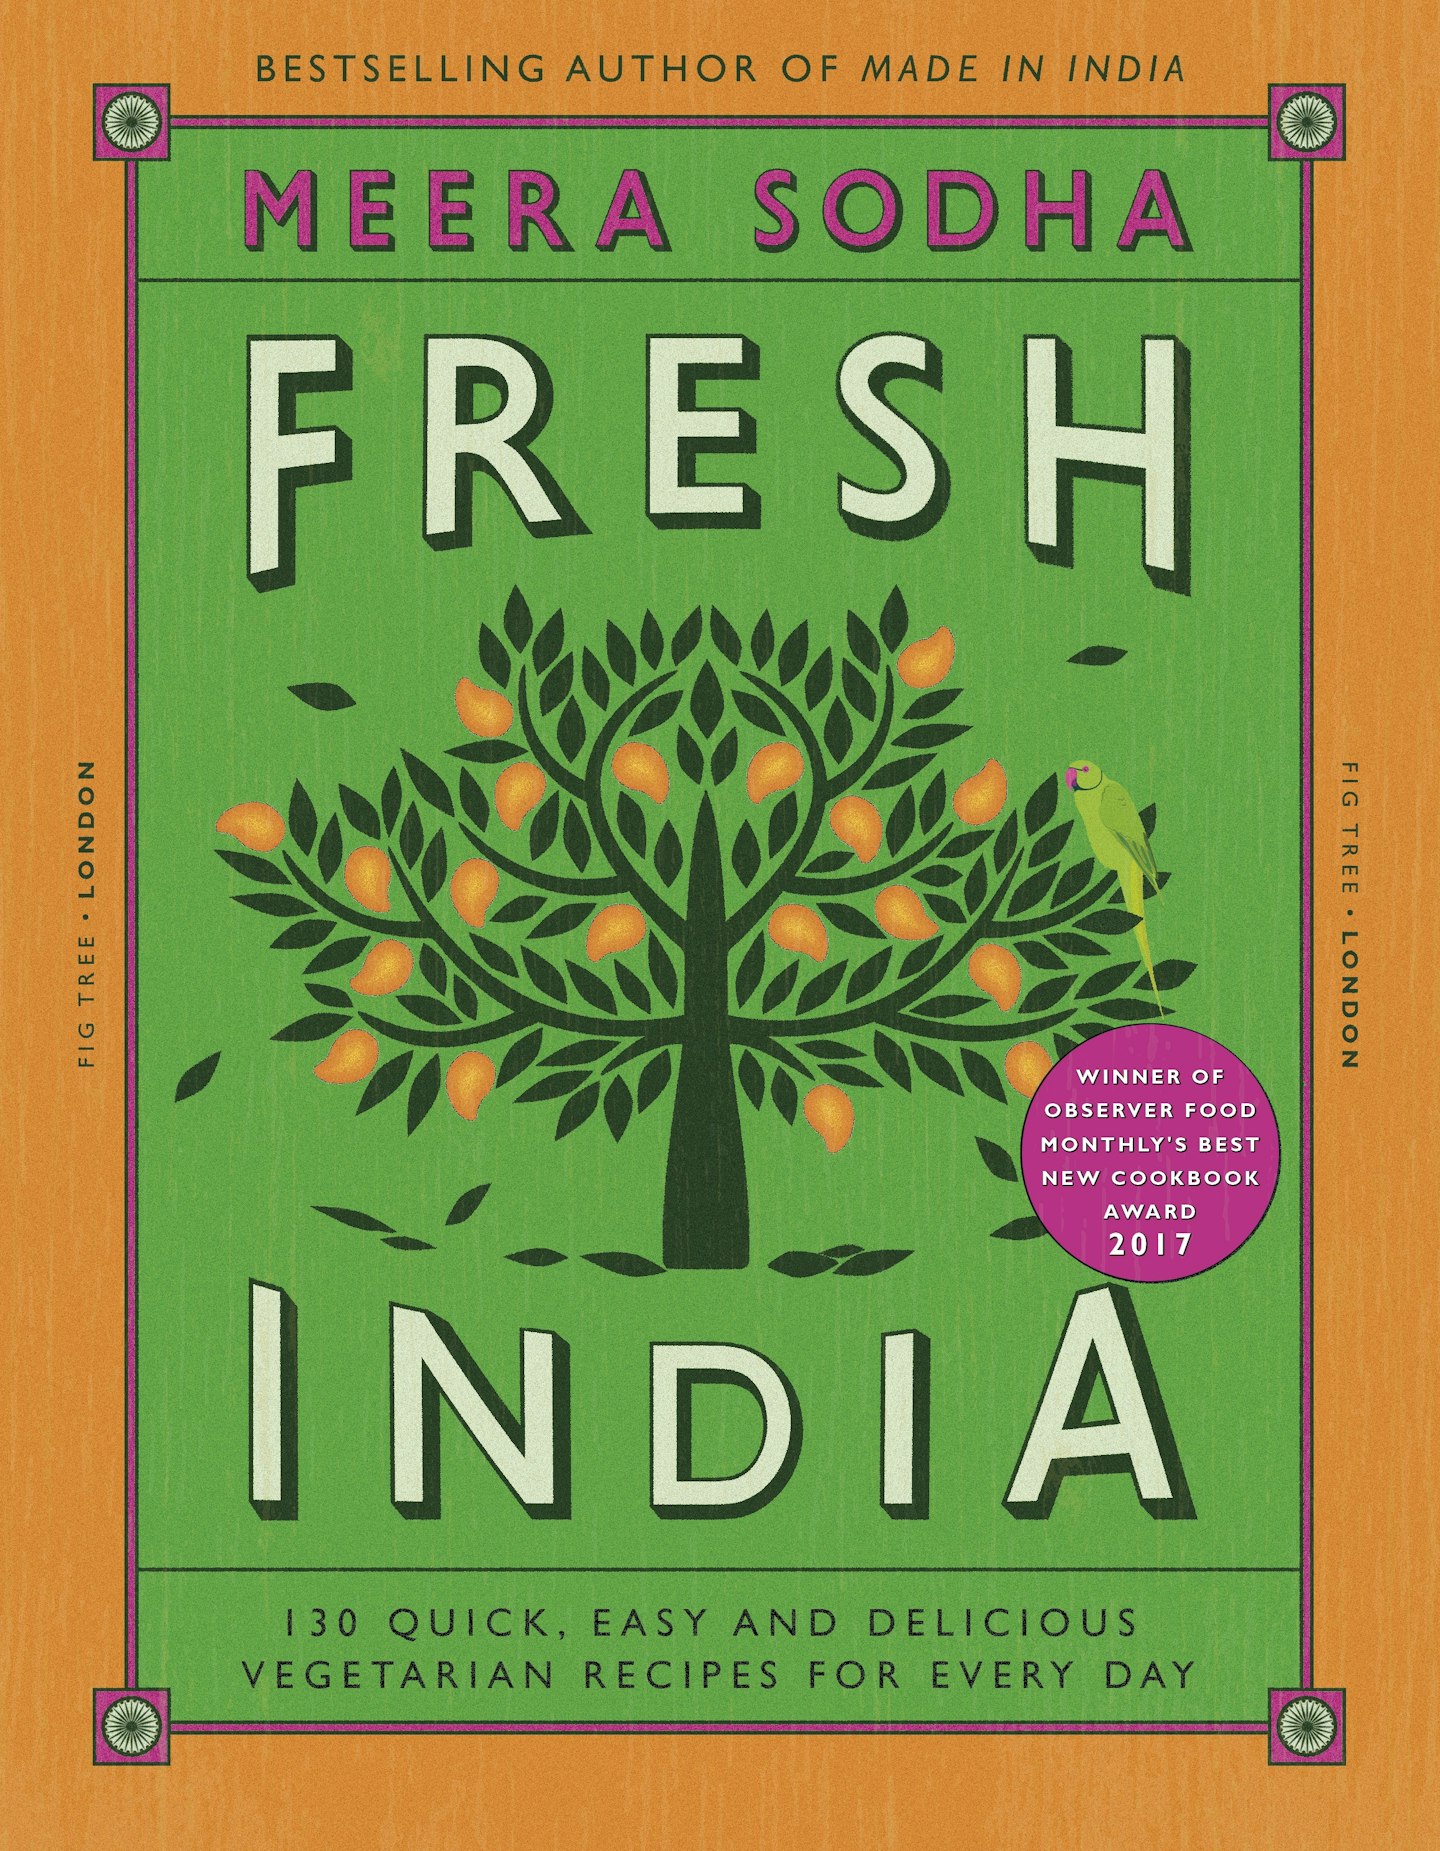 Penguin Books, Fresh India: 130 Quick, Easy and Delicious Vegetarian Recipes for Every Day by Meera Sodha, £20.00